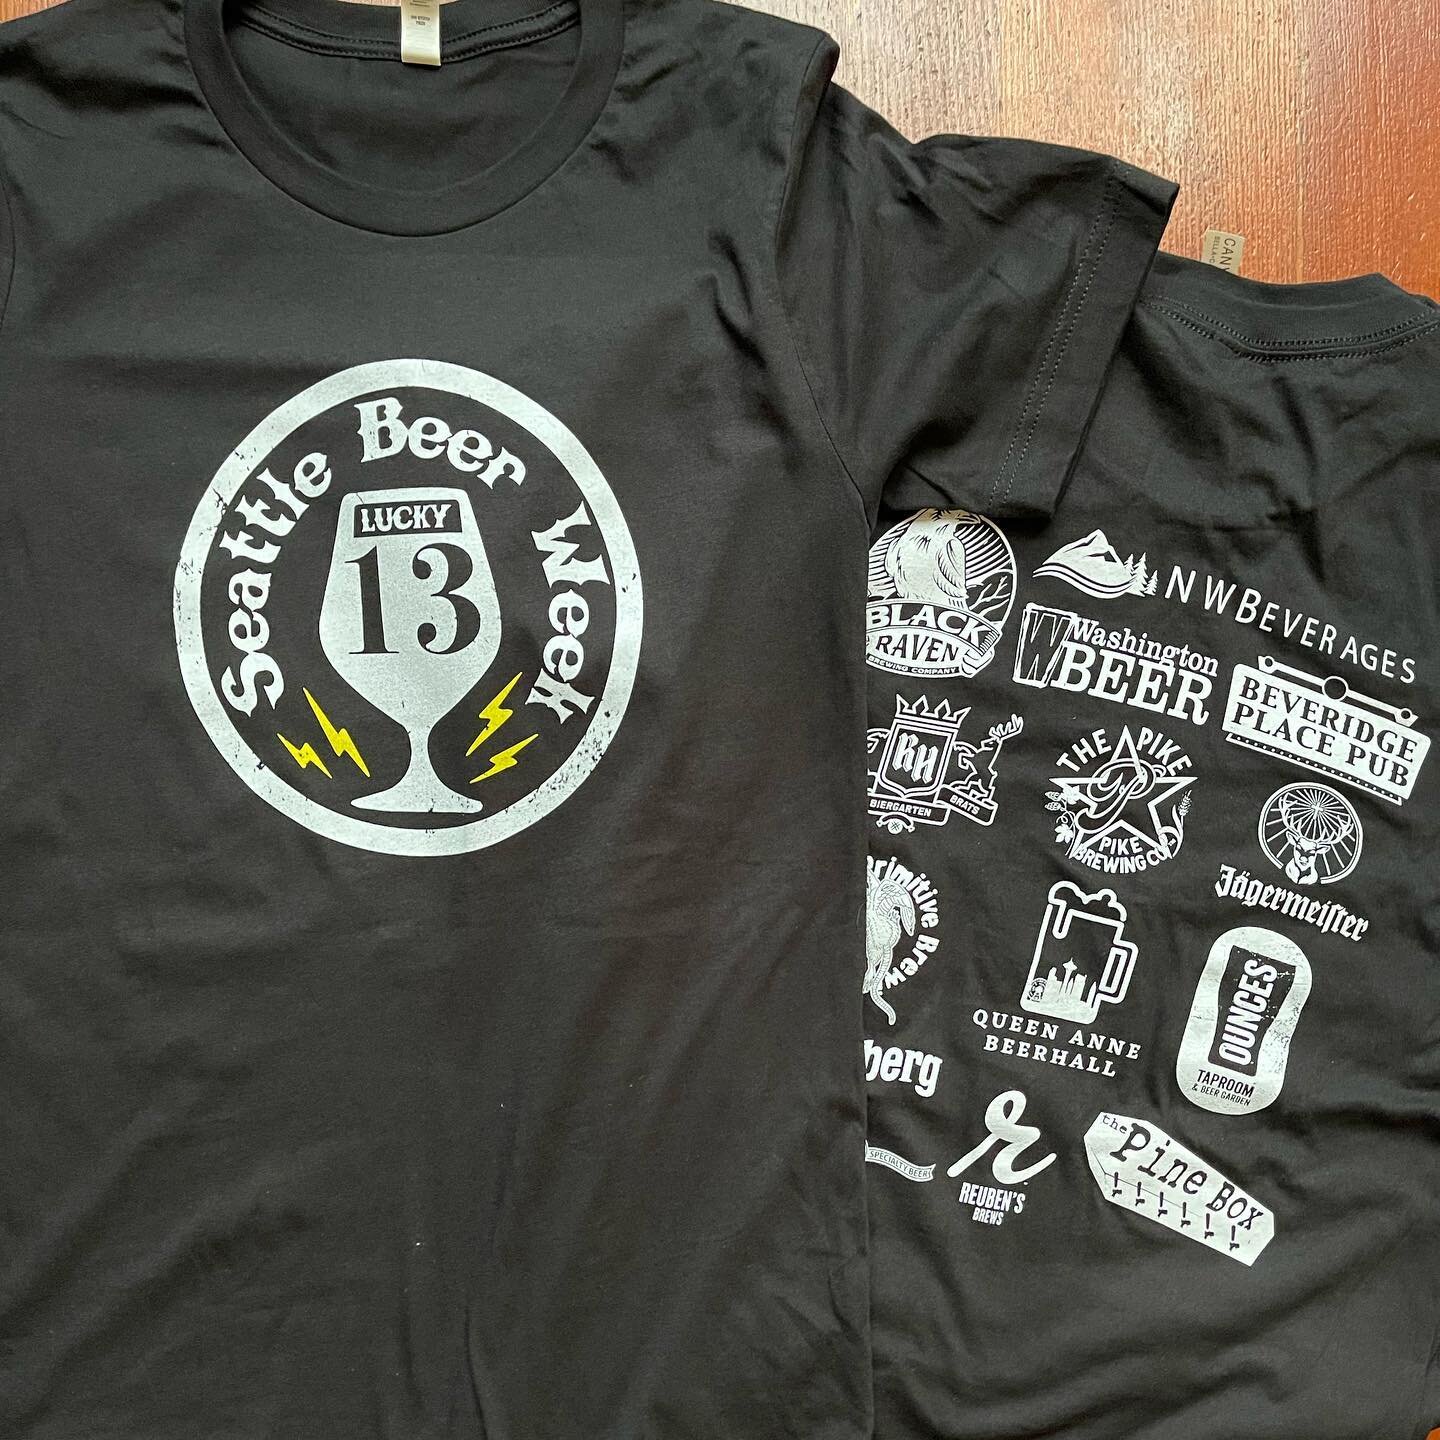 Did you miss out on this years Seattle Beer Week Shirt? Are you a size Medium or extra Large? If so we have a few left and we&rsquo;ll ship them to your door. Go to:

https://www.seattlebeerweek.com/seattle-beer-week-2022-shirt

#seattlebeerweek #wab